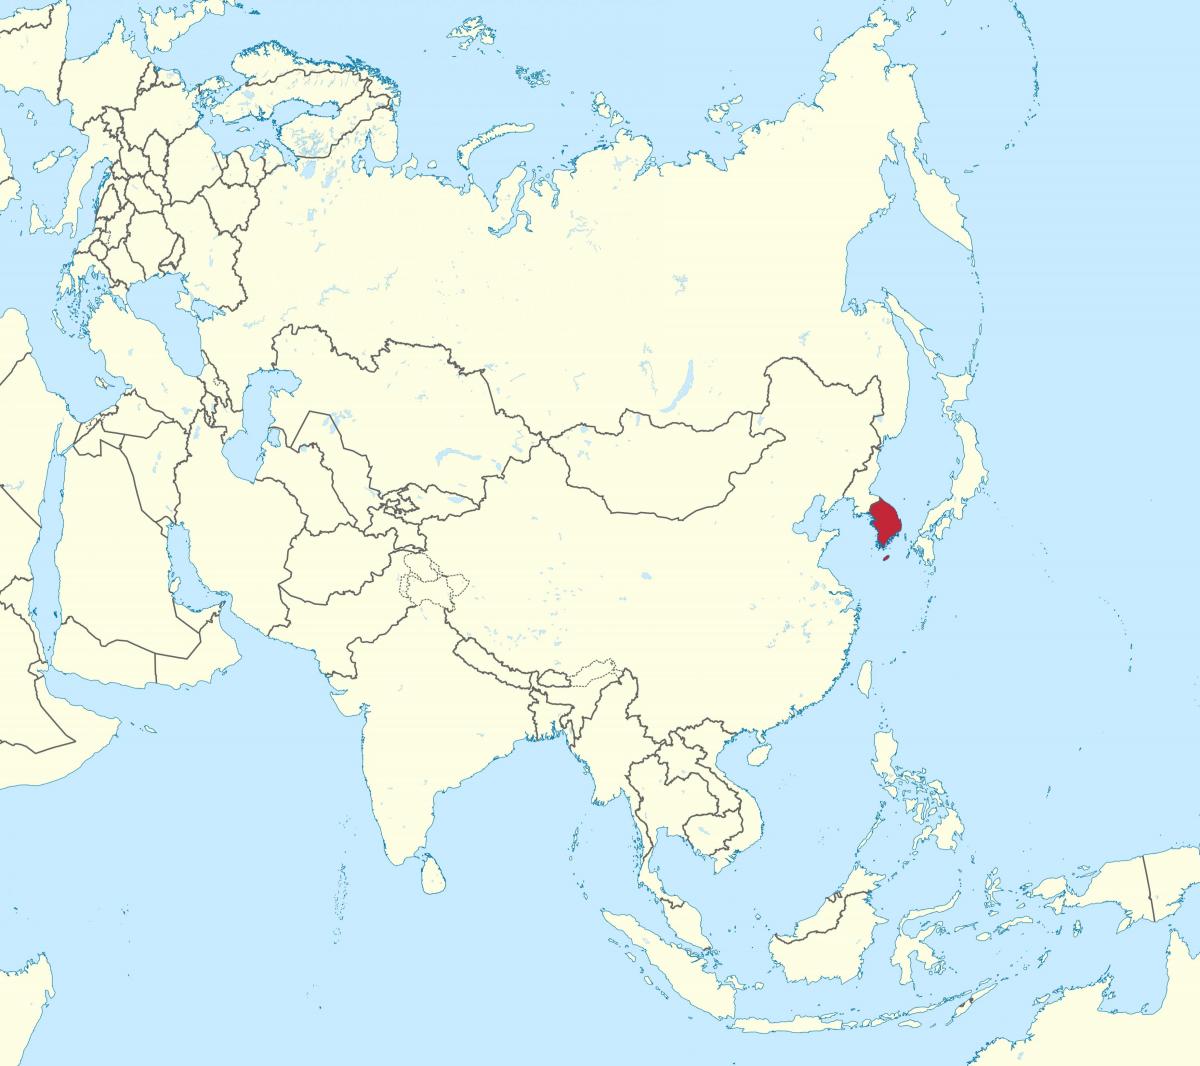 South Korea (ROK) location on the Asia map